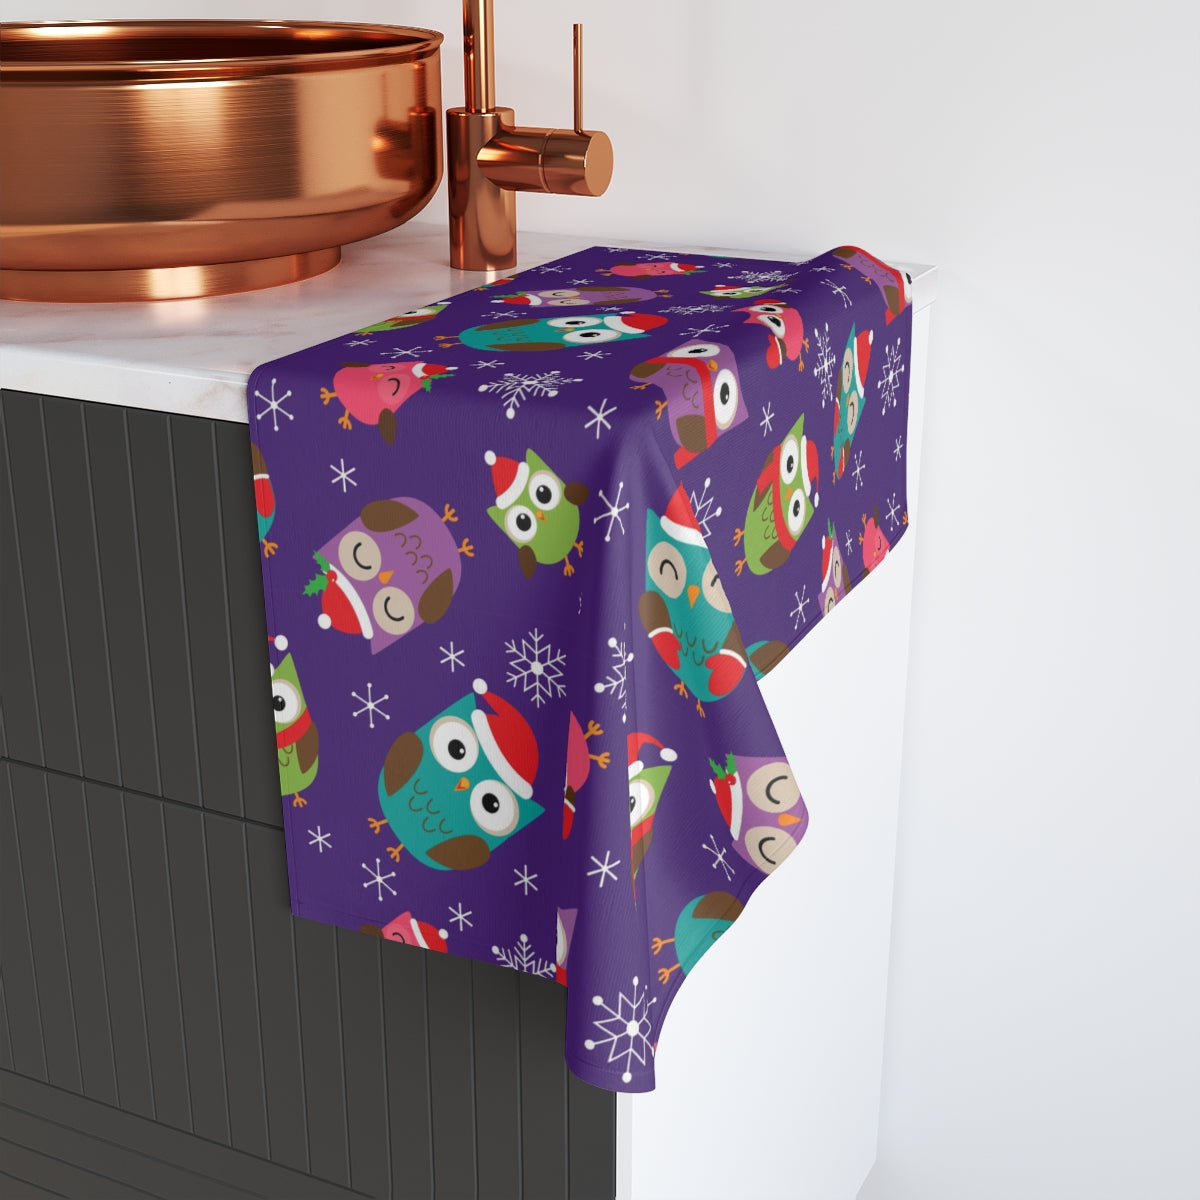 Owls and Snowflakes Hand Towel